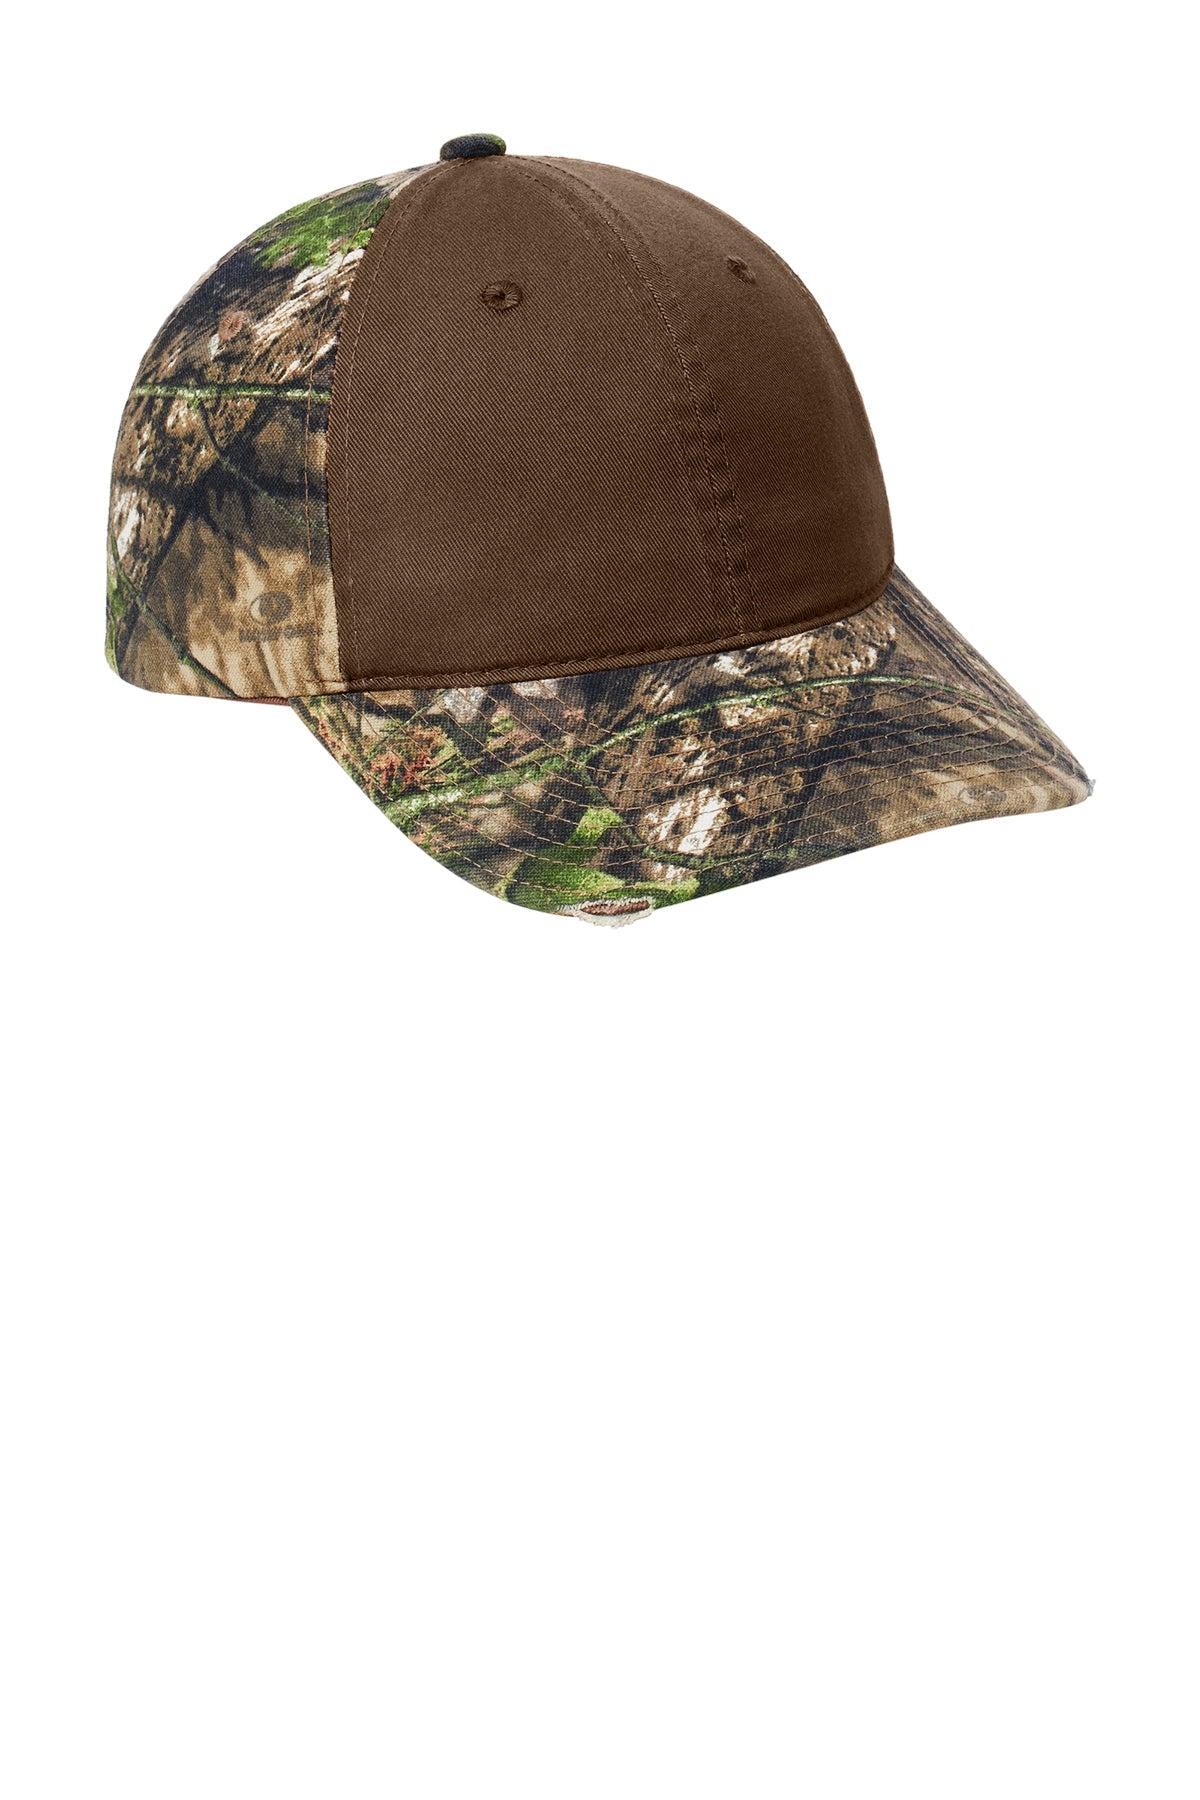 Port Authority Camo Custom Caps with Contrast Front Panel, Mossy Oak Break-Up Country/Chocolate